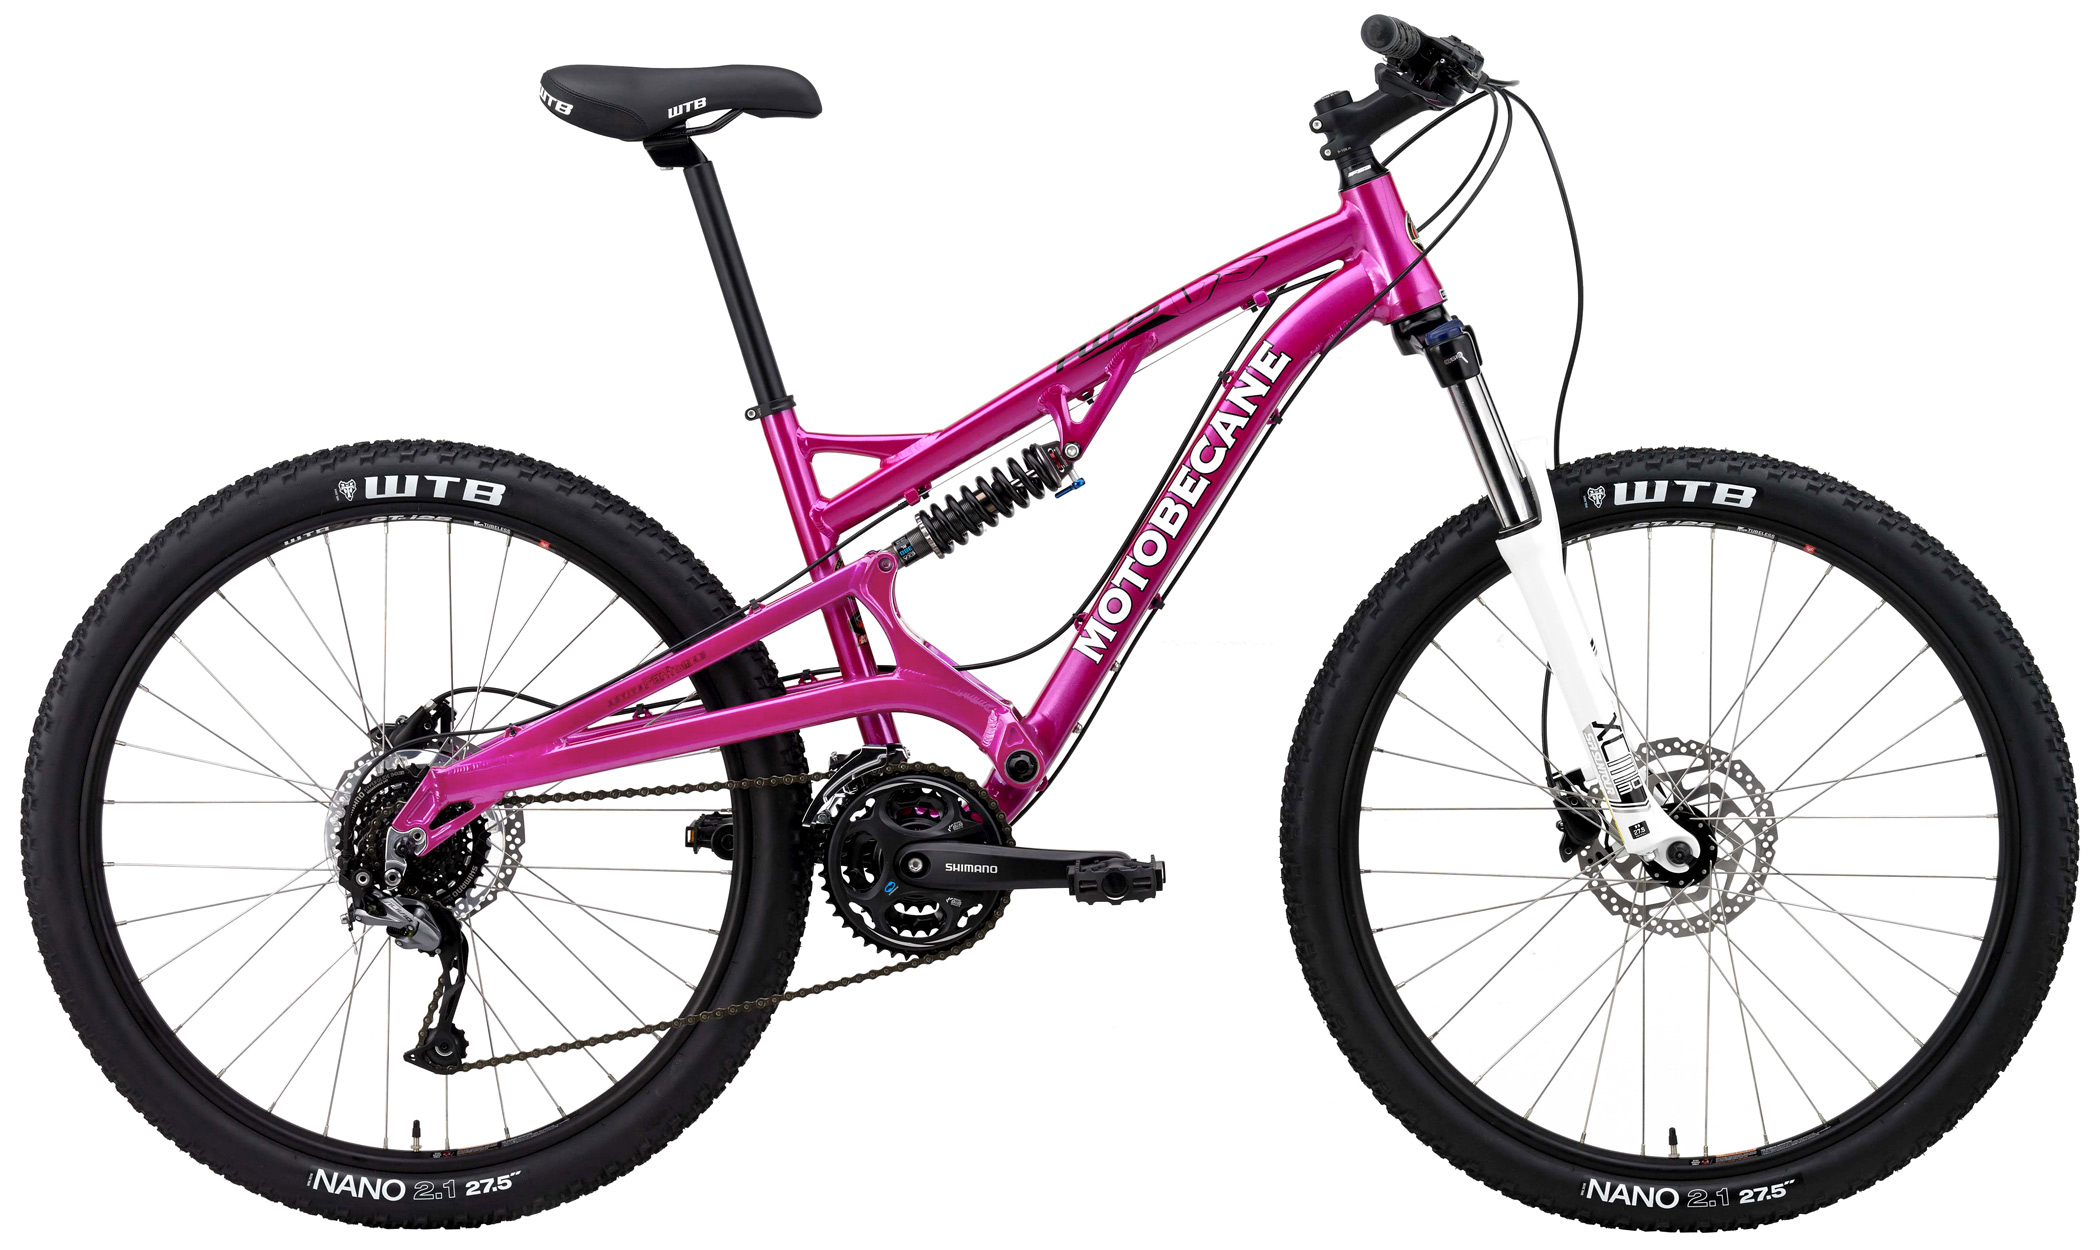 Samenhangend vaas Gaan wandelen Save up to 60% off new Mountain Bikes - Powerful Hydraulic Disk Brakes,  Motobecane Alps DS 24Spd Womens Full Suspension 27.5 Mountain Bikes+ FR/RR  Lockout HOT WTB TCS Tubeless Compatible Rims